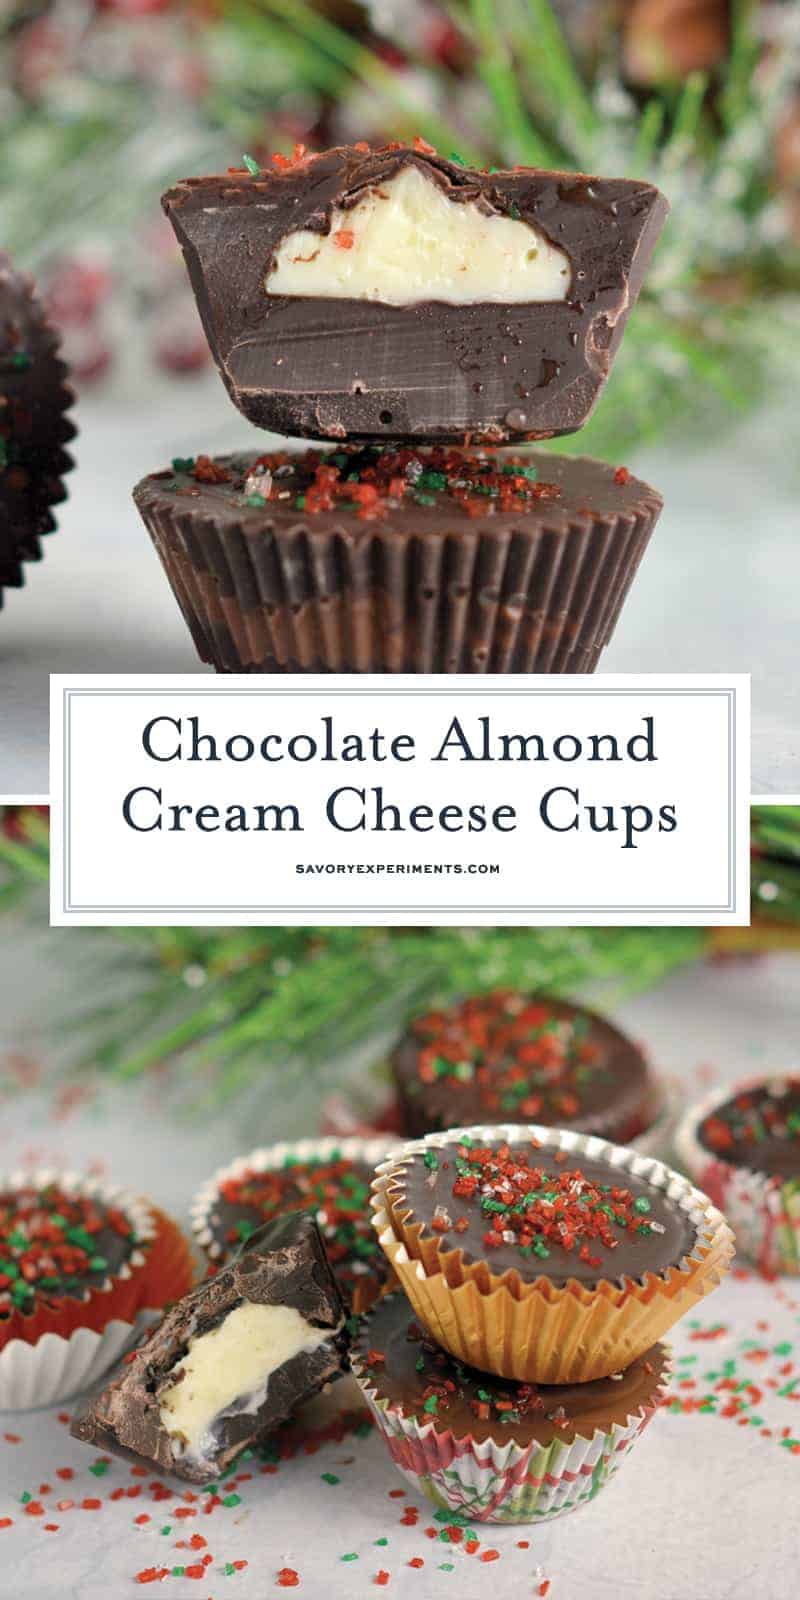 Dark Chocolate Almond Cream Cheese Cups are my secret no-bake dessert weapon. In only 15 minutes and 5 ingredients you will have your new favorite dessert. #nobakedesserts #cheesecakecups www.savoryexperiments.com 